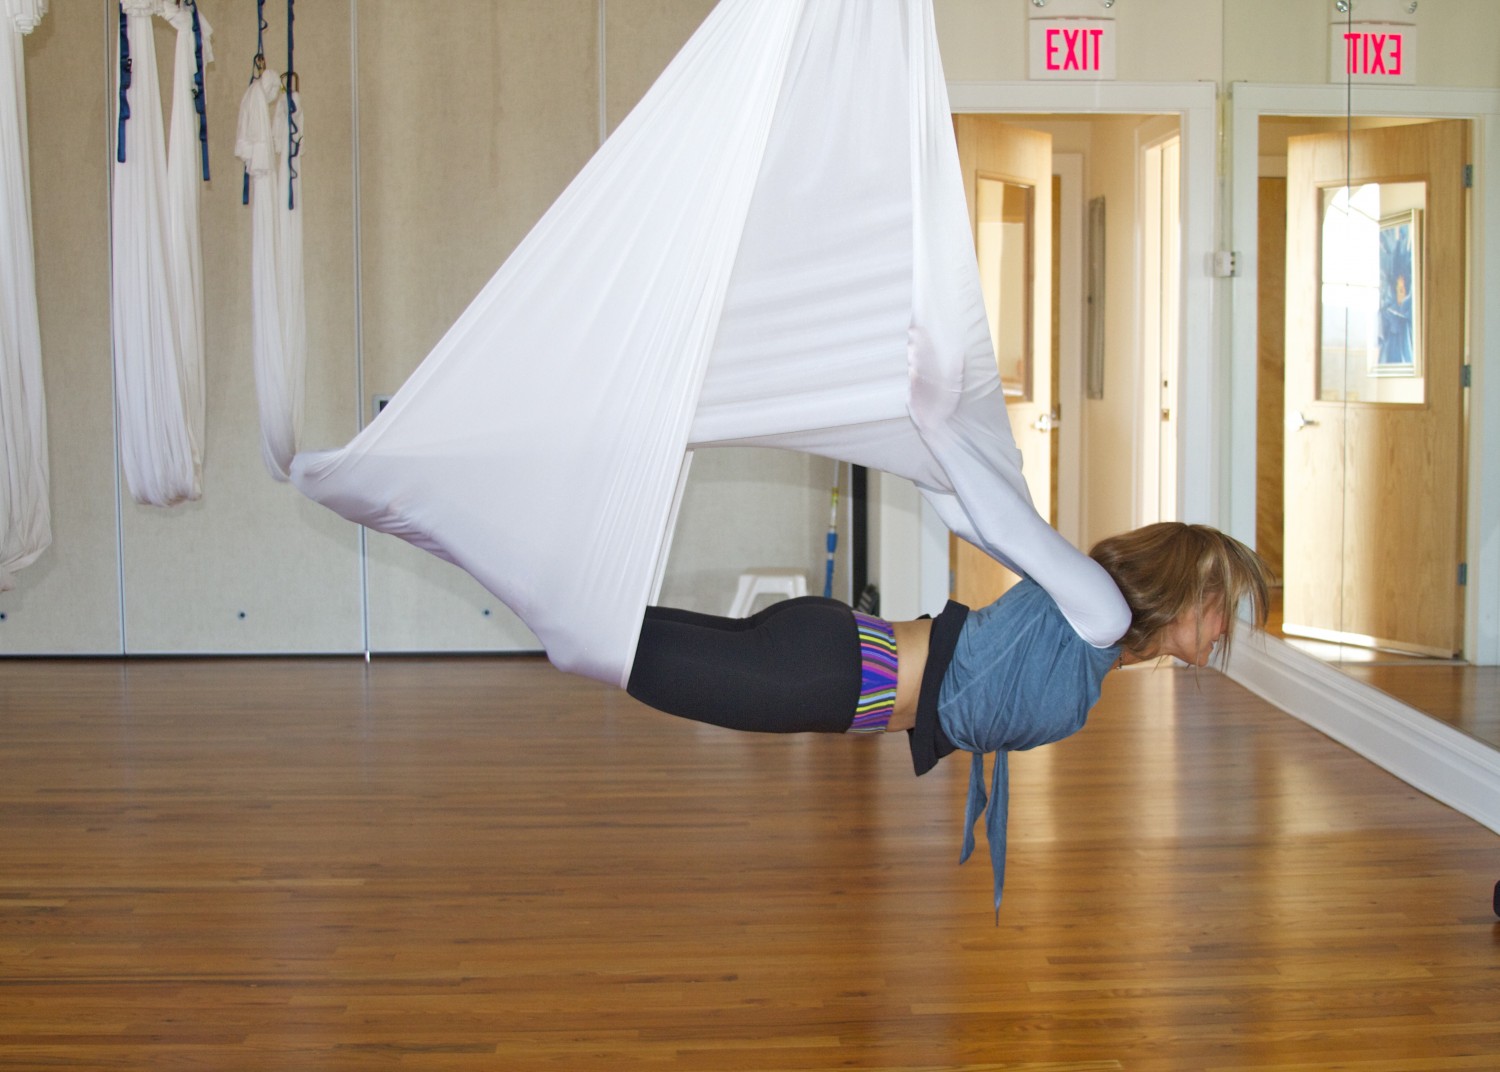 8 Yoga Hammocks for Turning Your Practice Upside Down This Summer